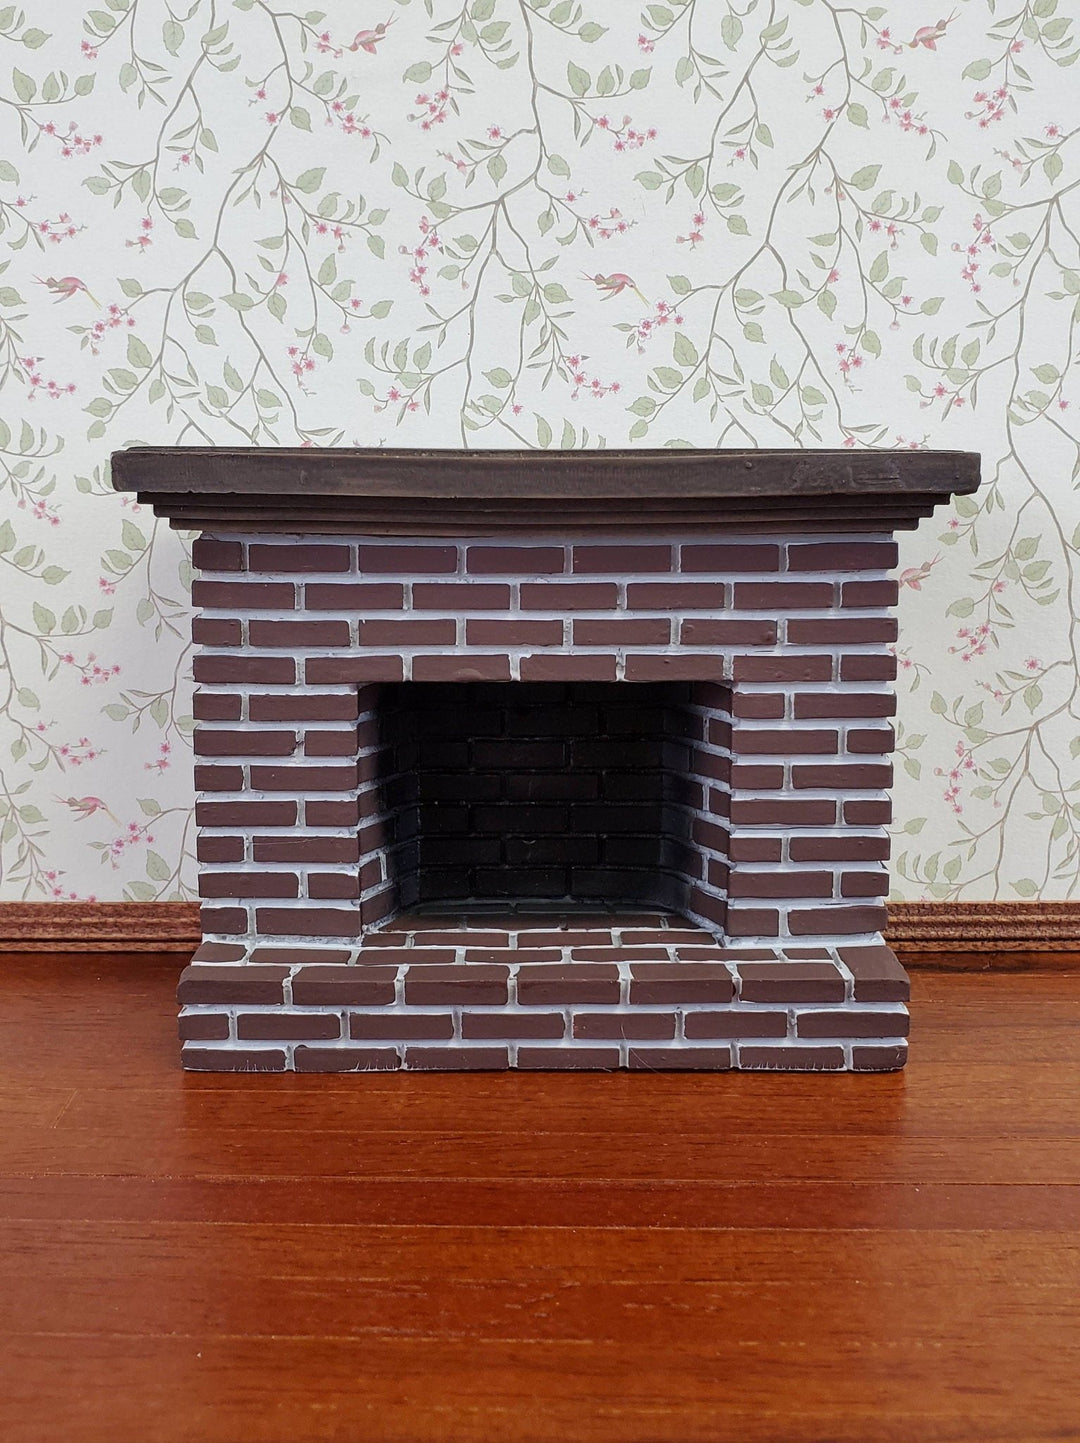 Dollhouse Fireplace Brick Old Colonial Style 1:12 Scale Miniature - Miniature Crush